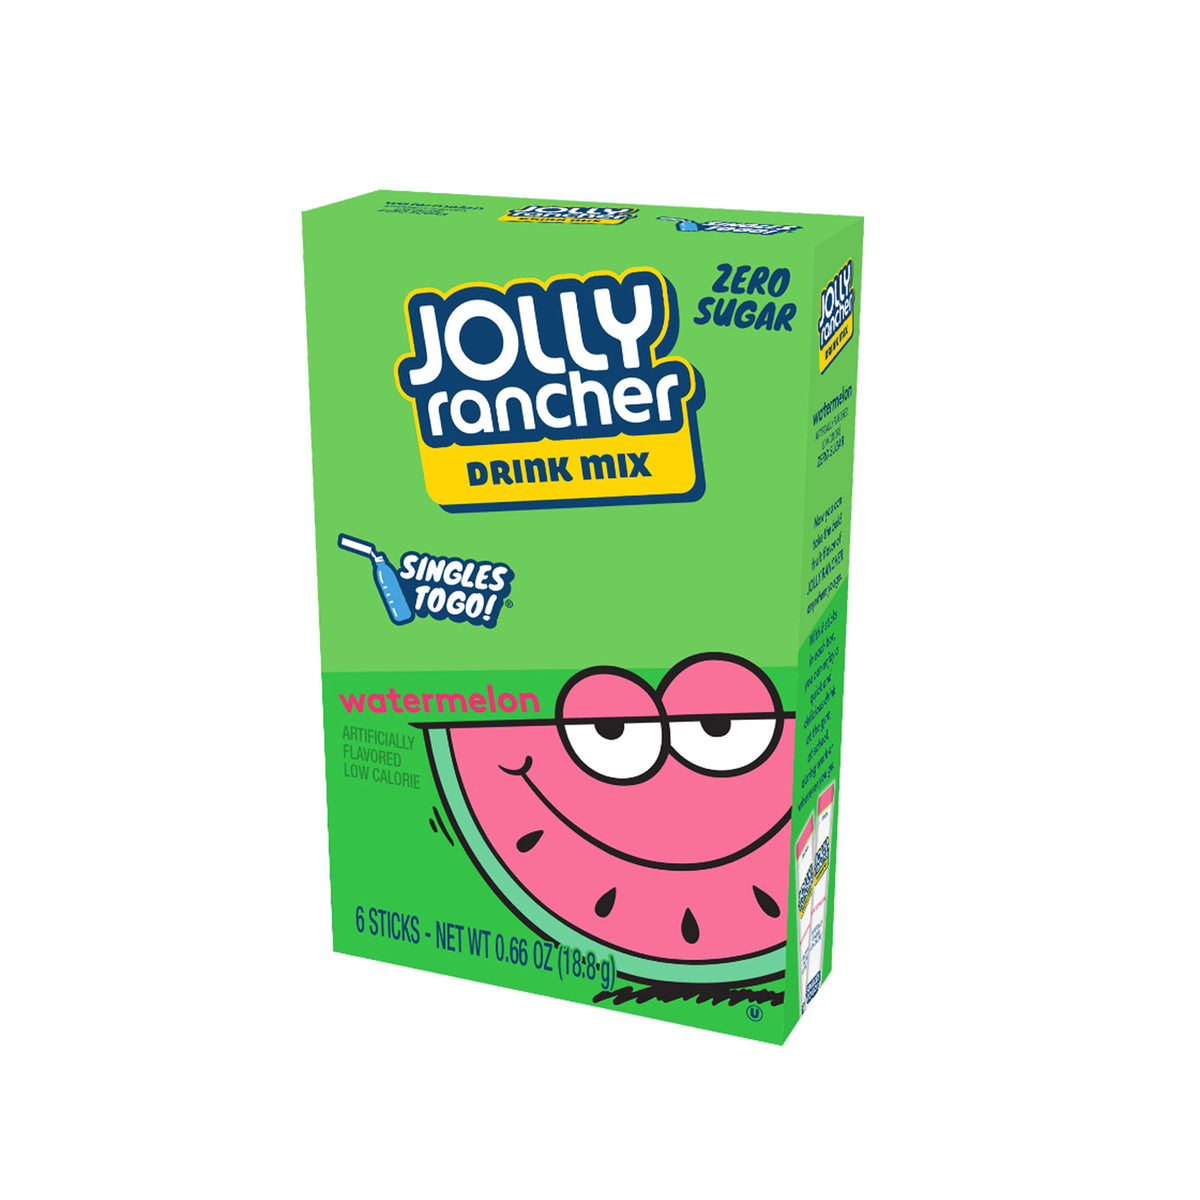 jolly rancher singles to go powdered drink mix - watermelon - 6ct